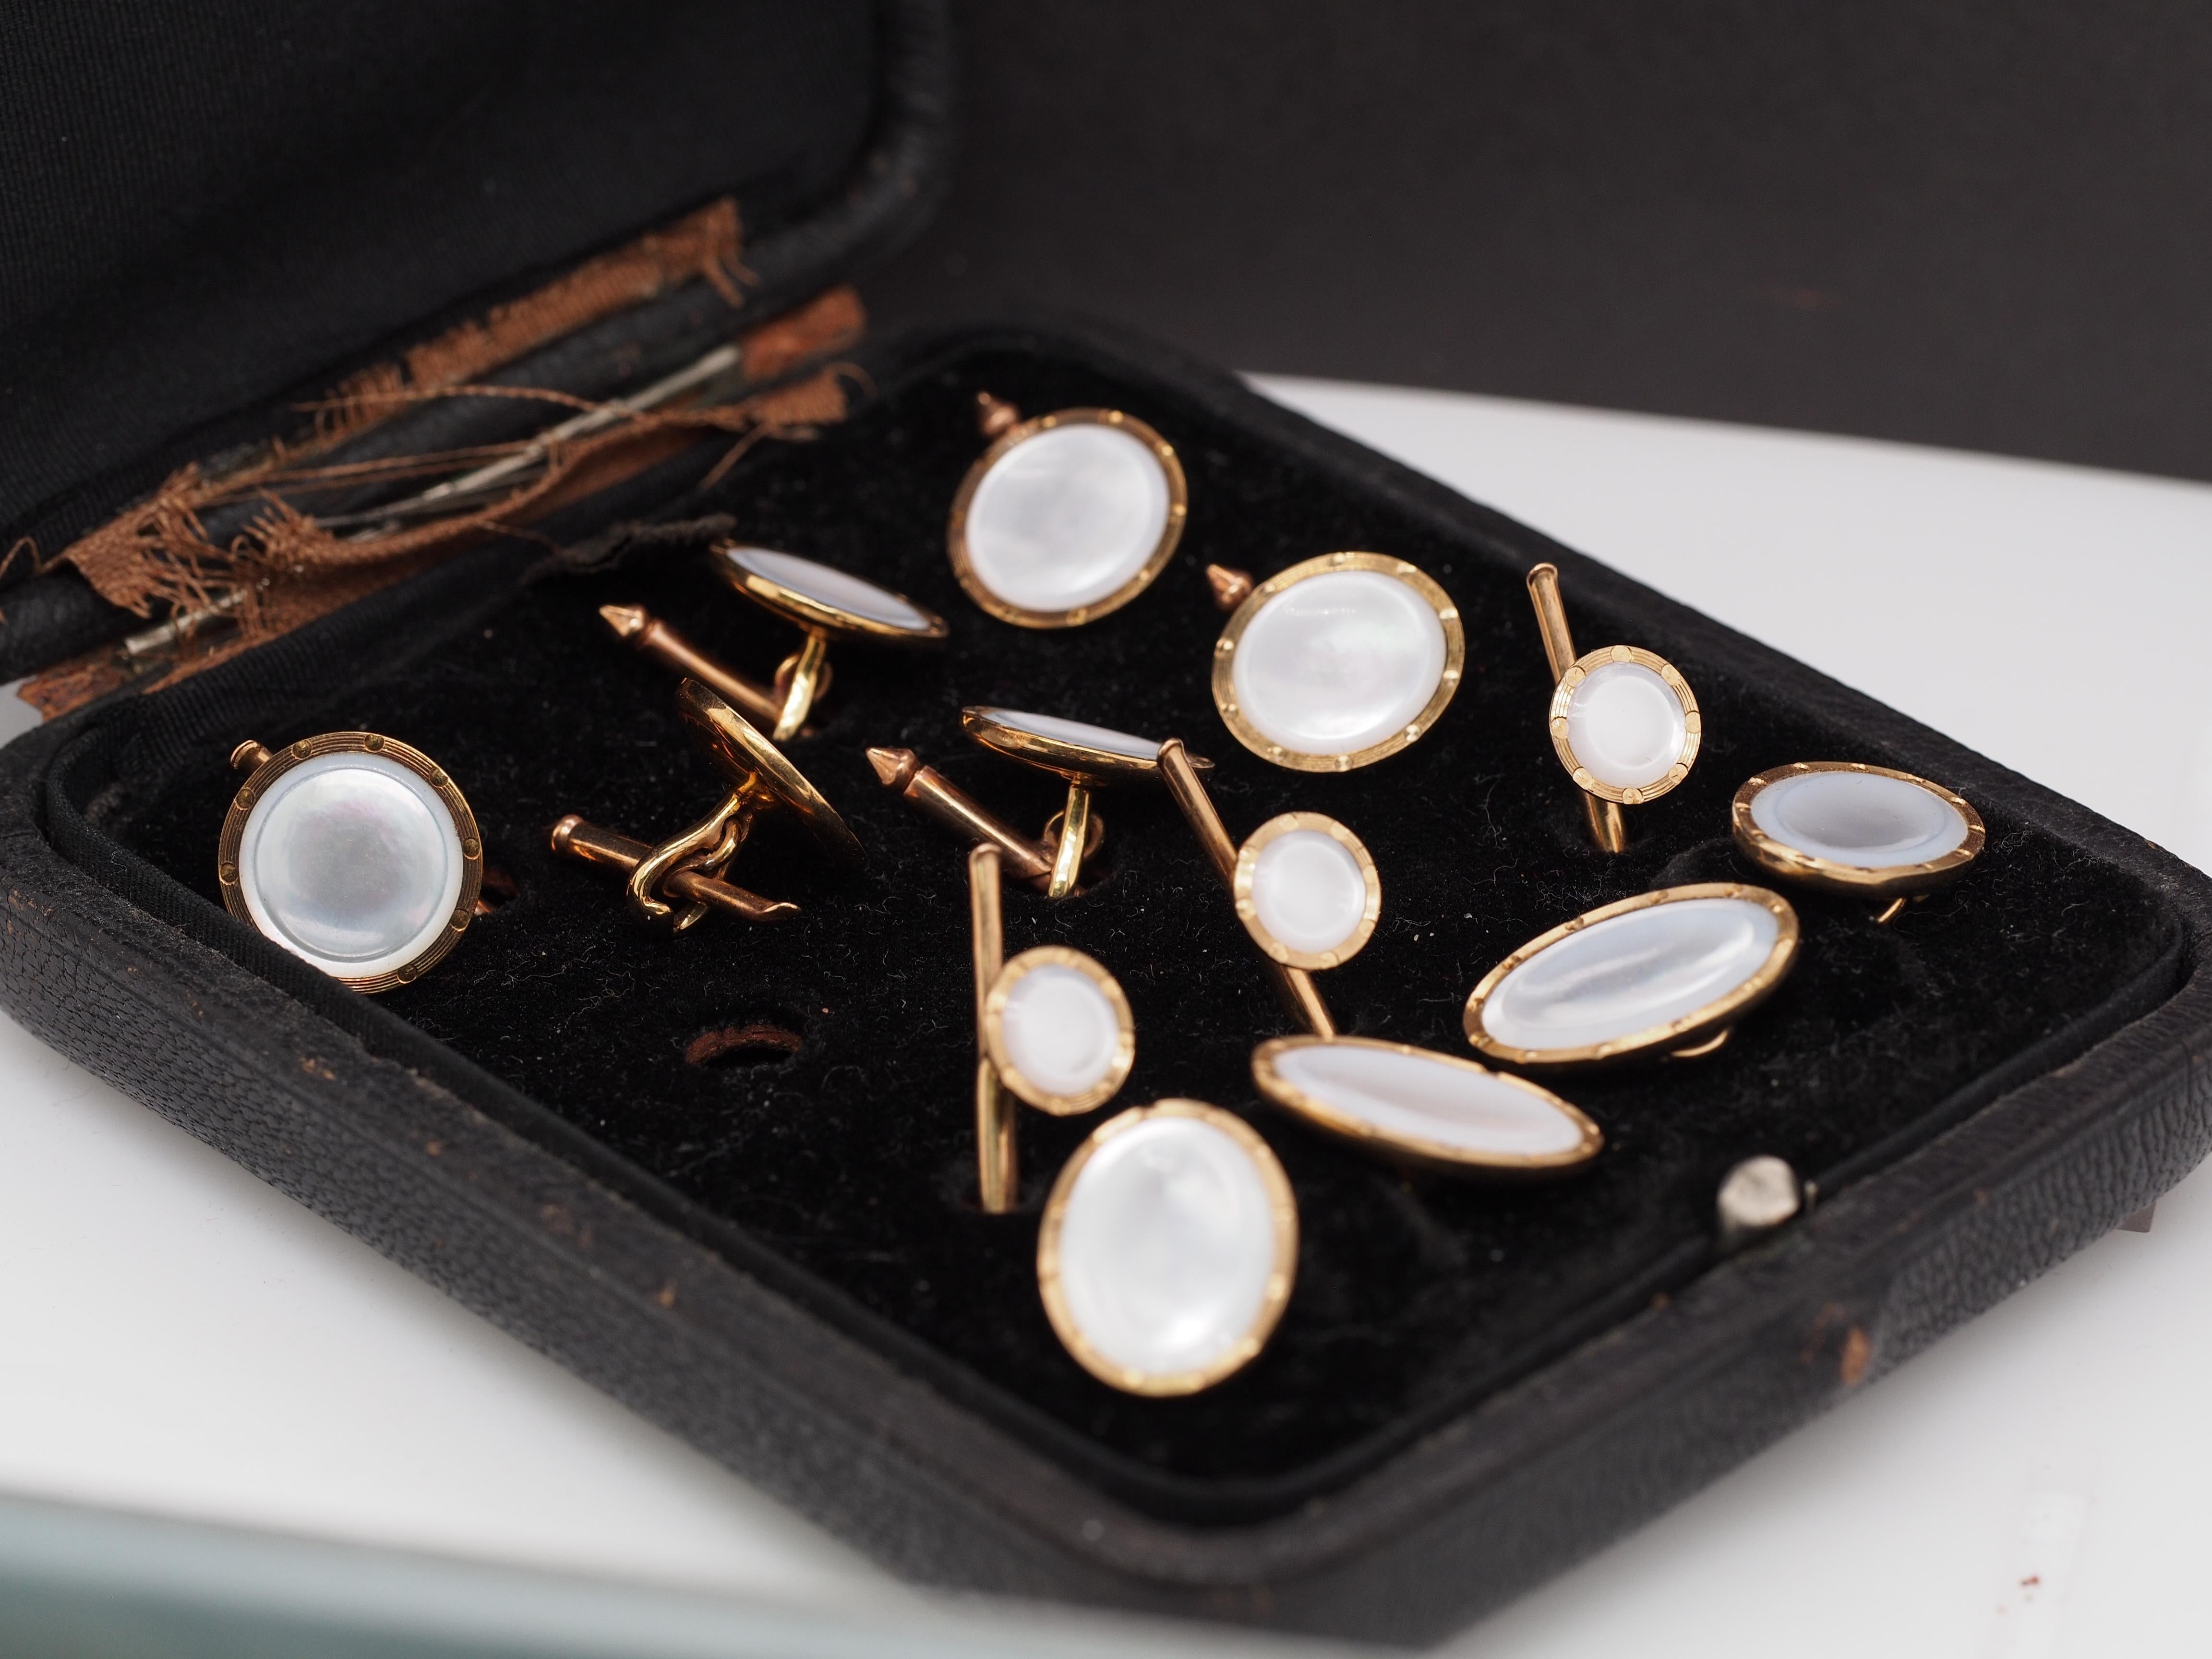 Circa 1920s 14K Yellow Gold Mother of Pearl Cufflink and Tuxedo Set For Sale 1